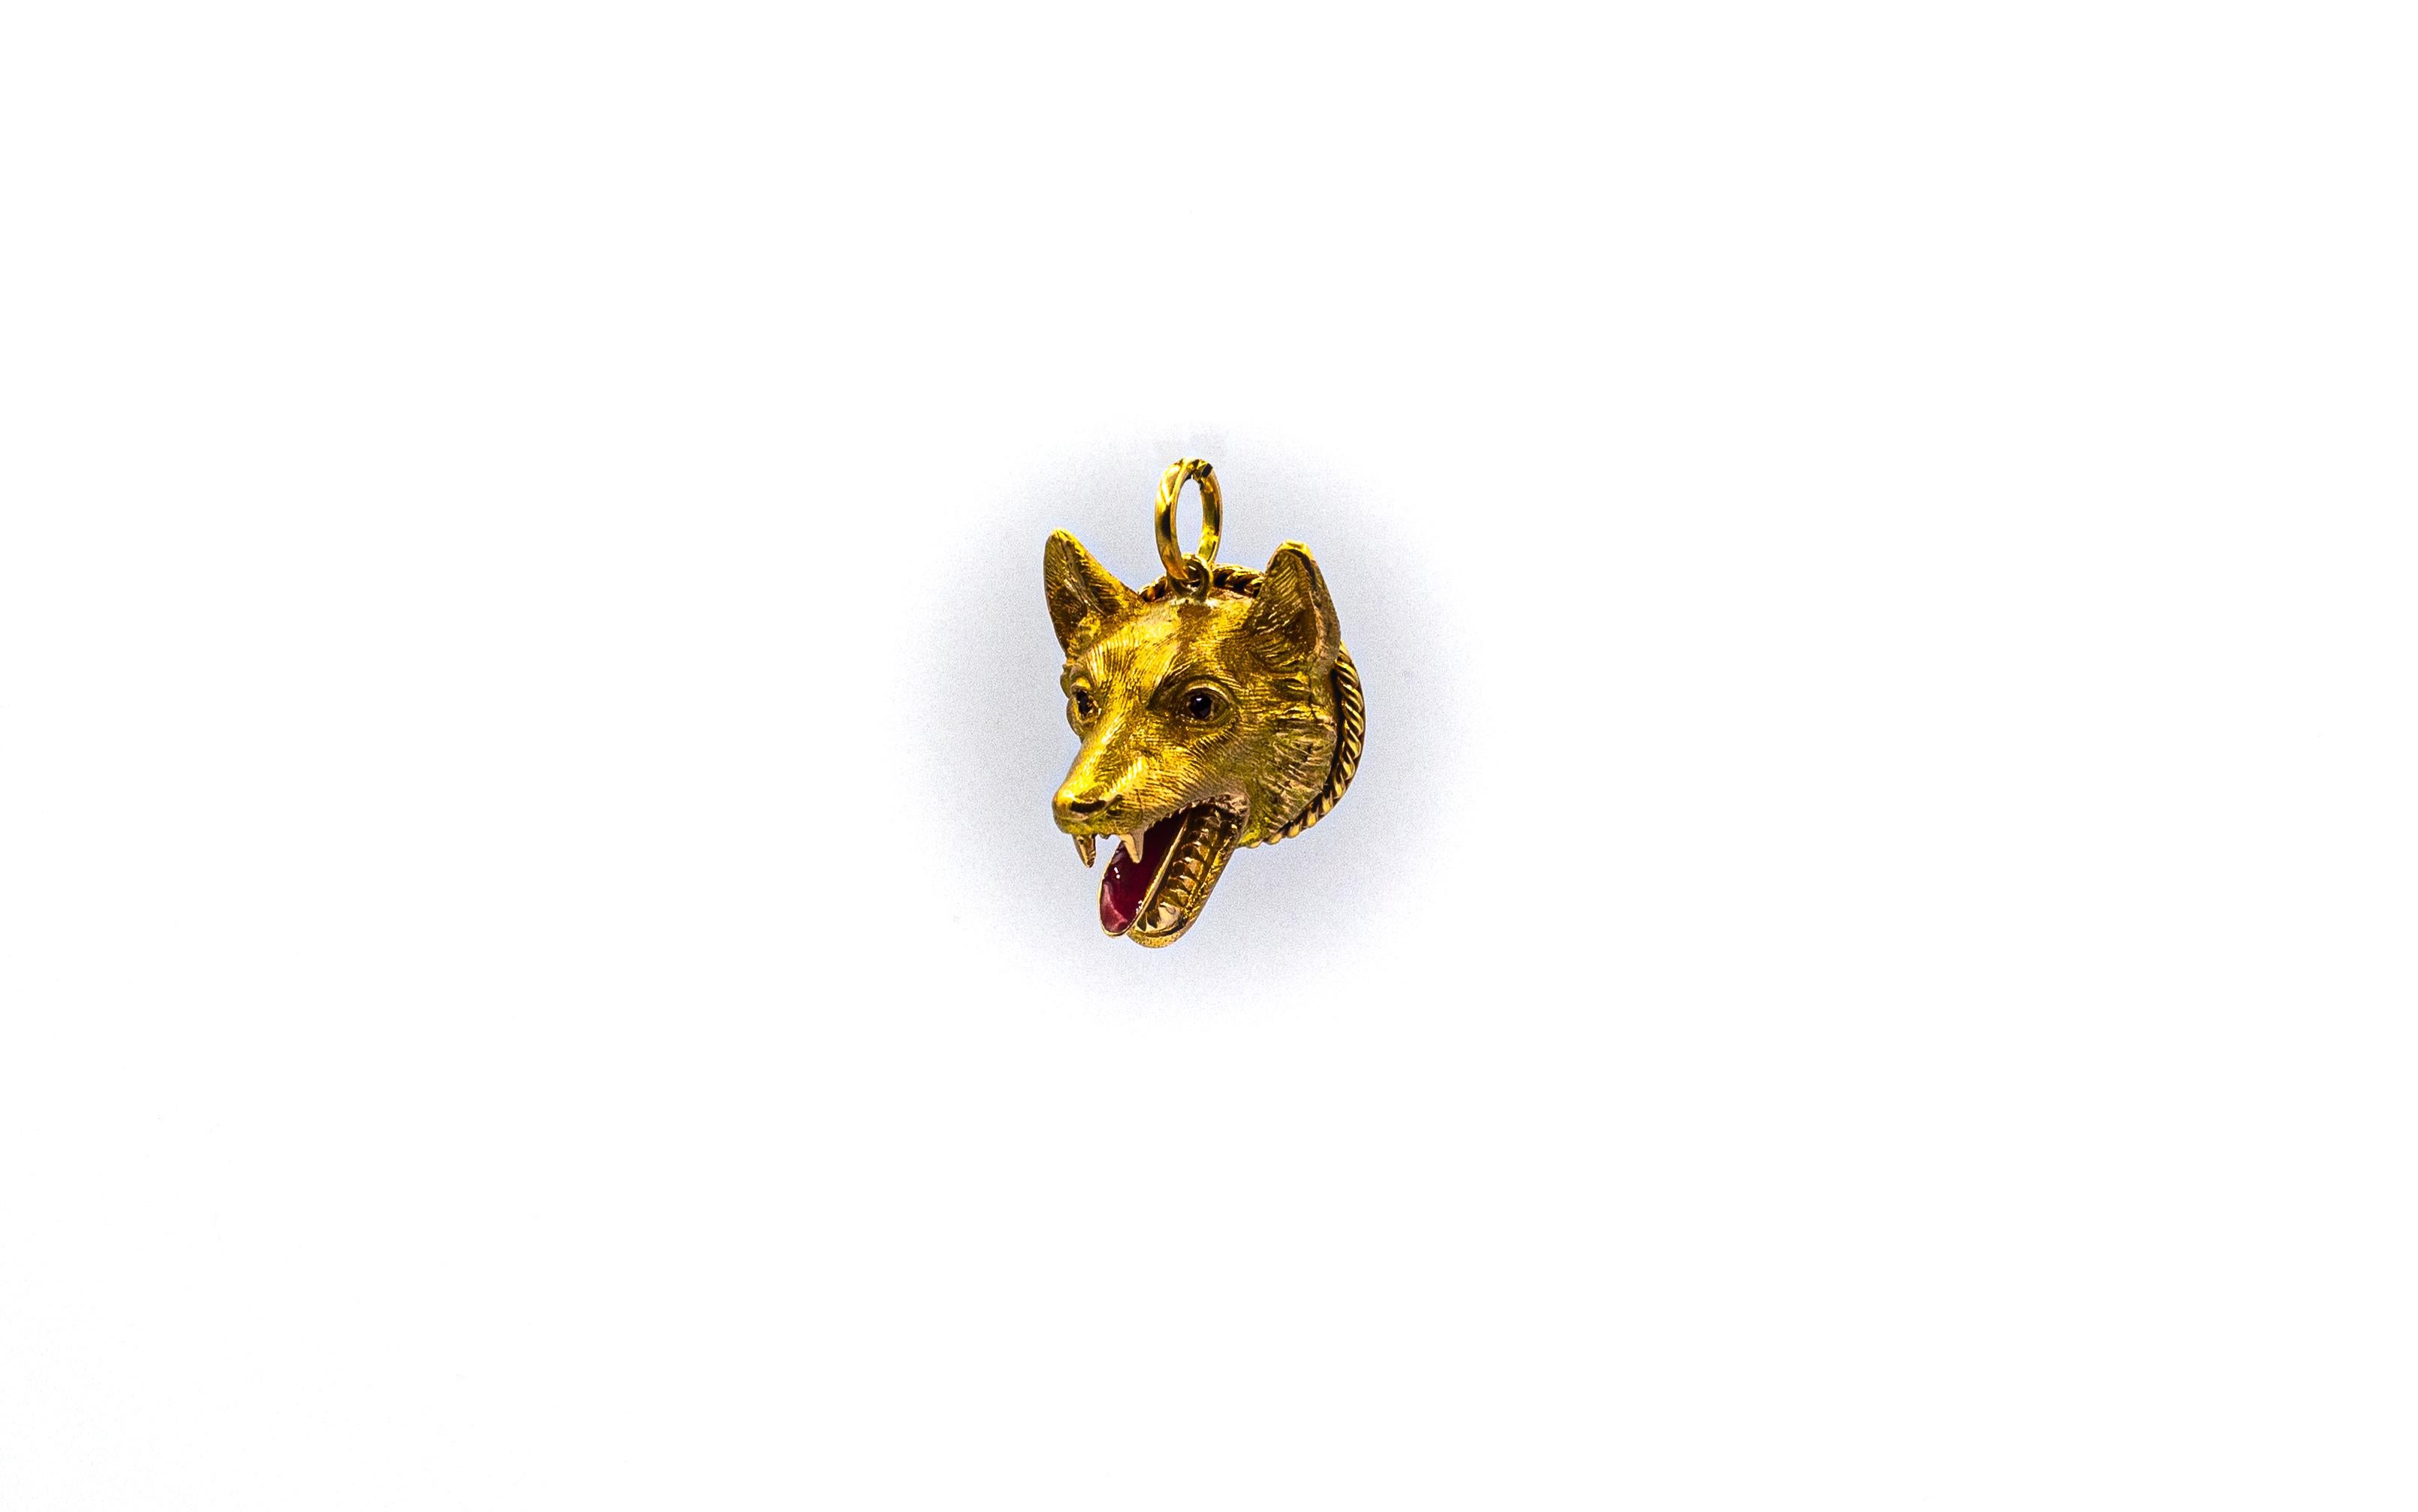 This Pendant is made of 9K Yellow Gold.
This Pendant has 0.08 Carats of Rubies.
This Pendant has Red Enamel.
This Pendant represents the 